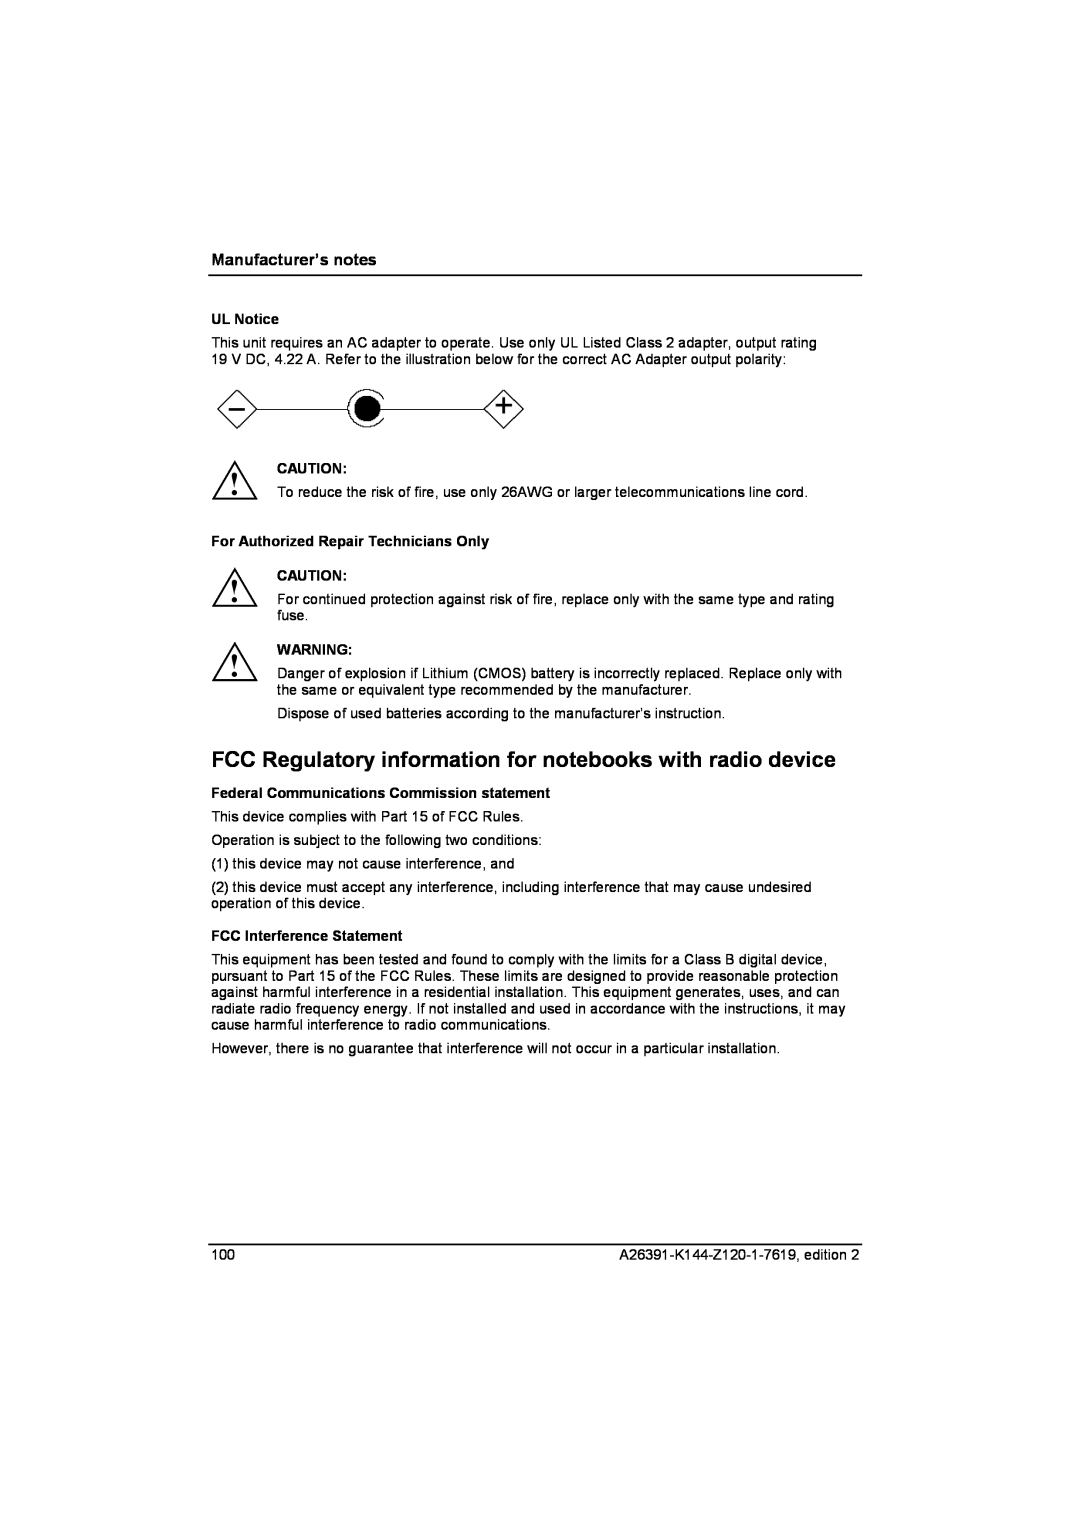 Fujitsu S SERIES manual FCC Regulatory information for notebooks with radio device, UL Notice, FCC Interference Statement 